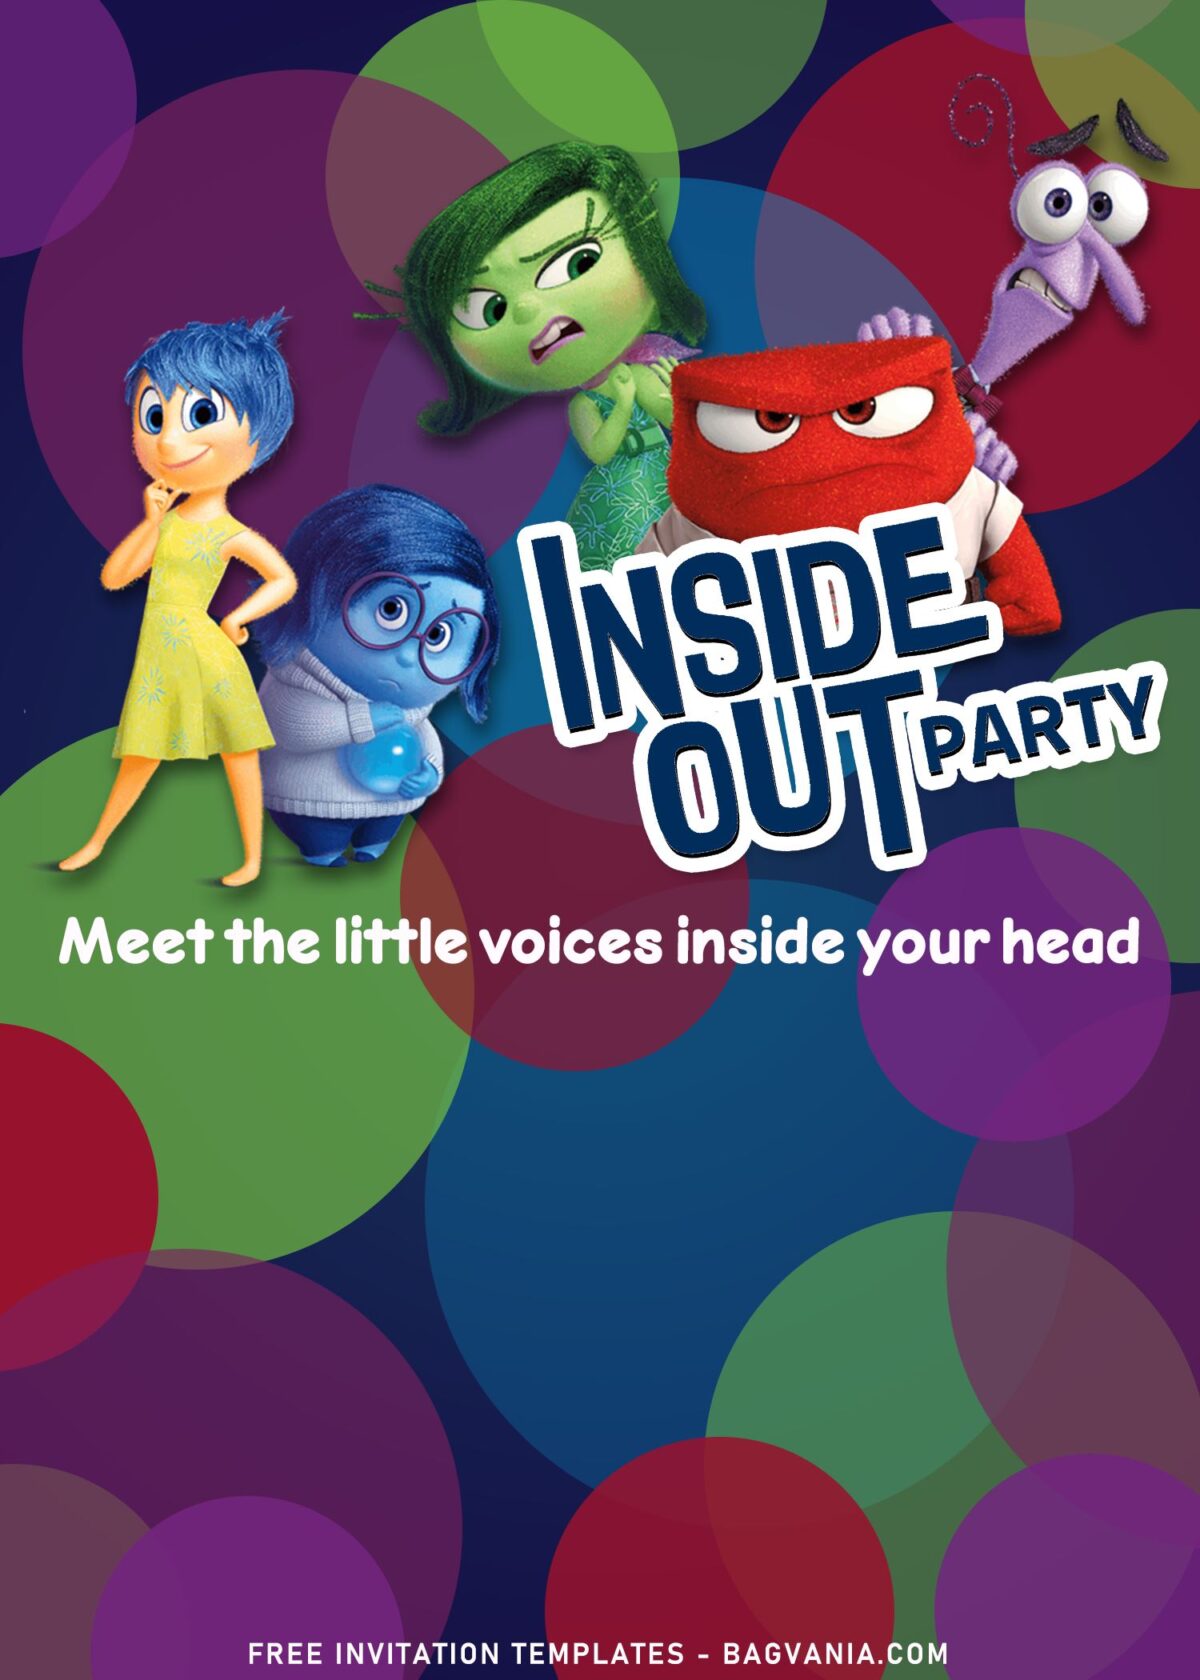 10+ Amusing Disney Inside Out Birthday Invitation Templates with color shapes background